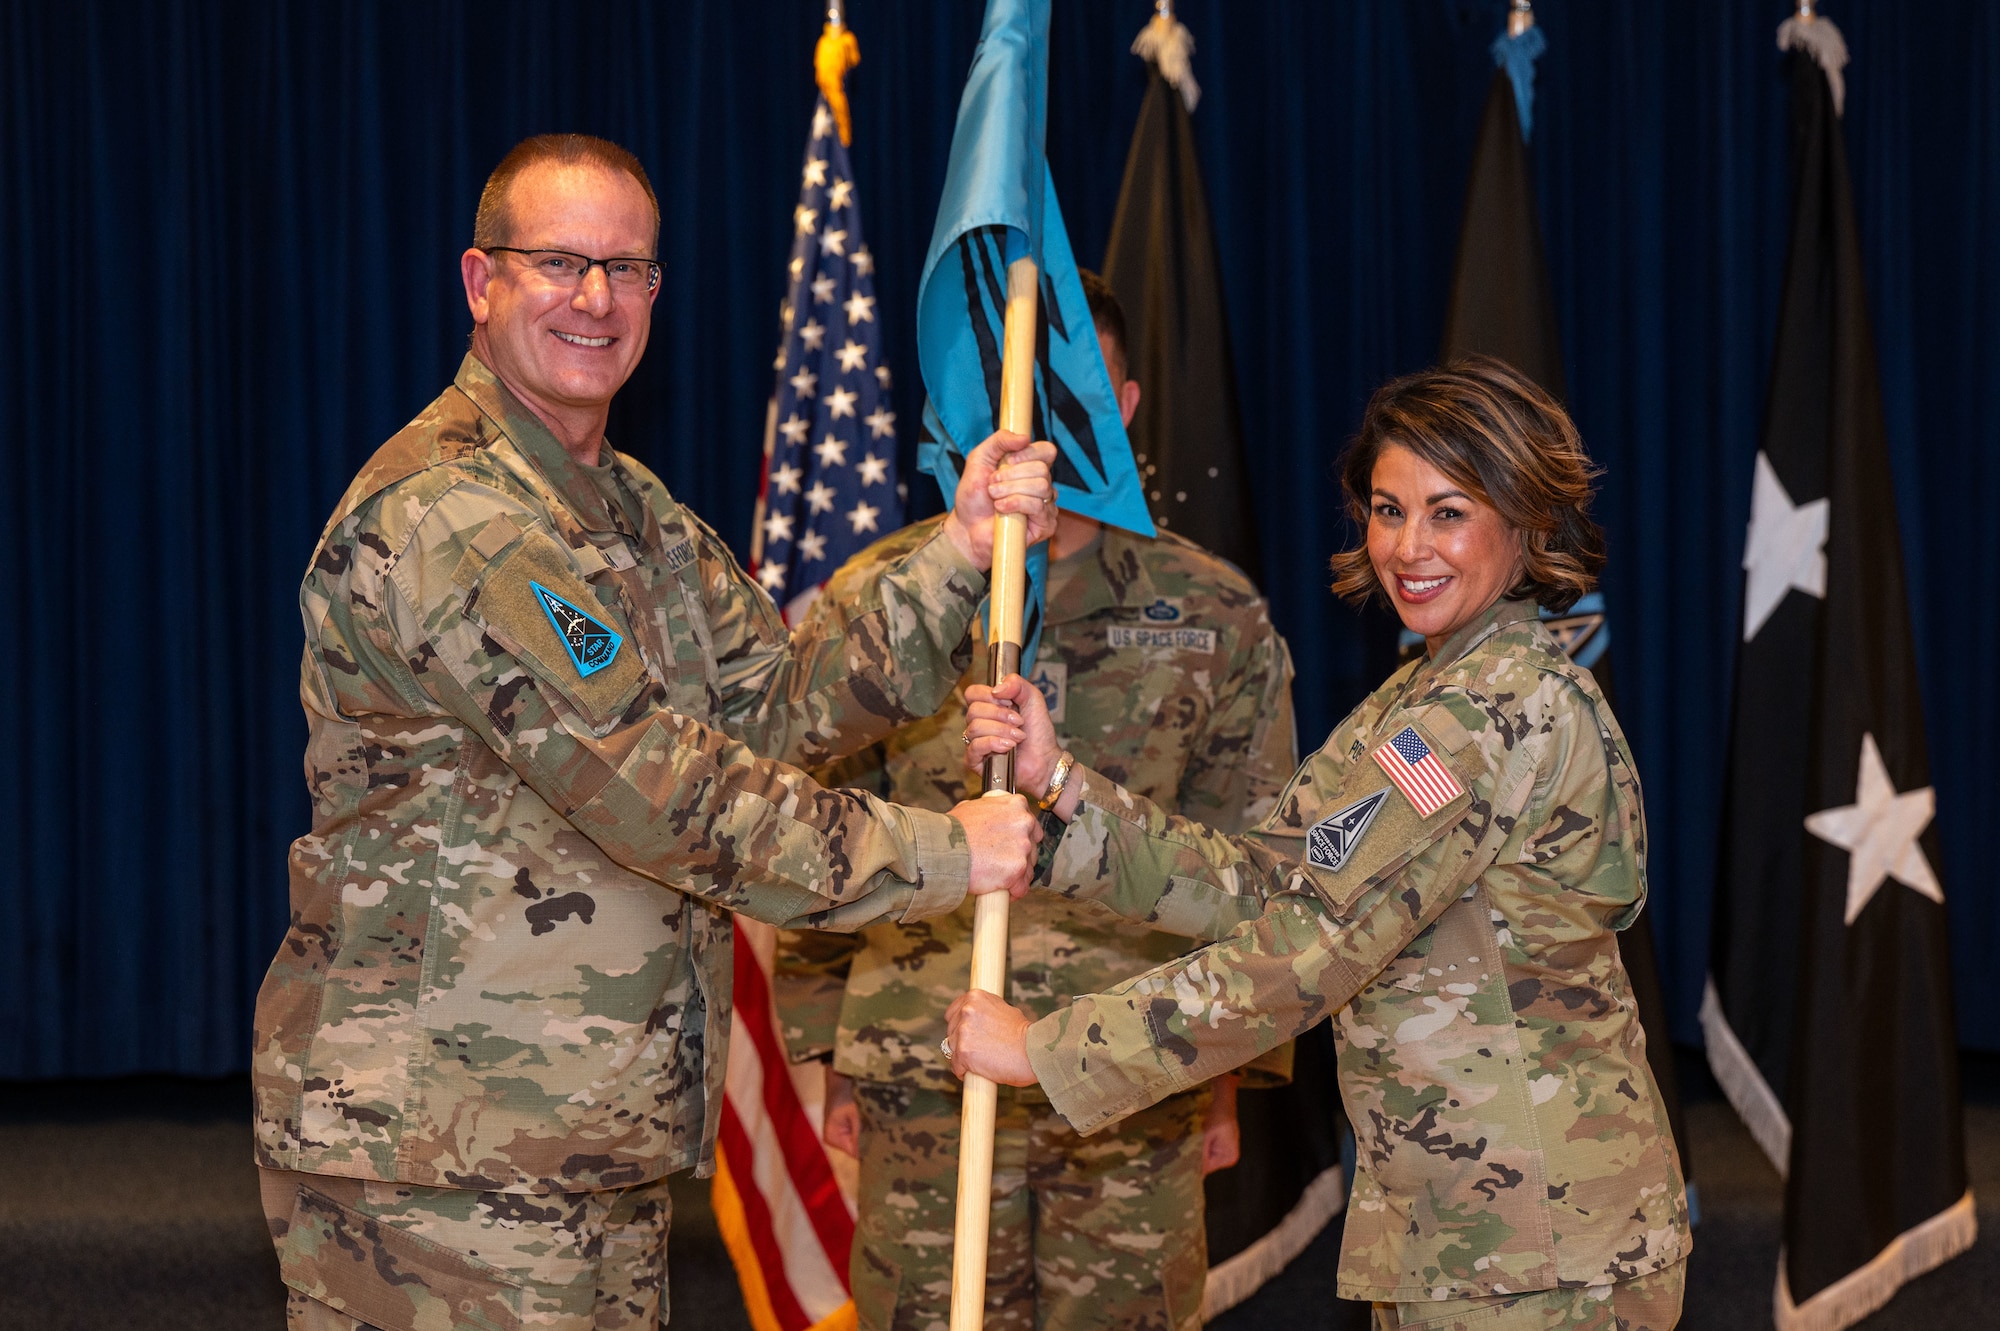 U.S. Space Force Chief Master Sgt. Karmann-Monique Pogue accepts the unit guidon from Maj. Gen. Timothy Sejba, commander of Space Training and Readiness Command, during a change of responsibility ceremony at Peterson Space Force Base, Colorado, Jan. 19, 2024. During the ceremony, Pogue succeeded Chief Master Sgt. James Seballes as the second senior enlisted leader of STARCOM. (U.S. Space Force photo by Ethan Johnson)